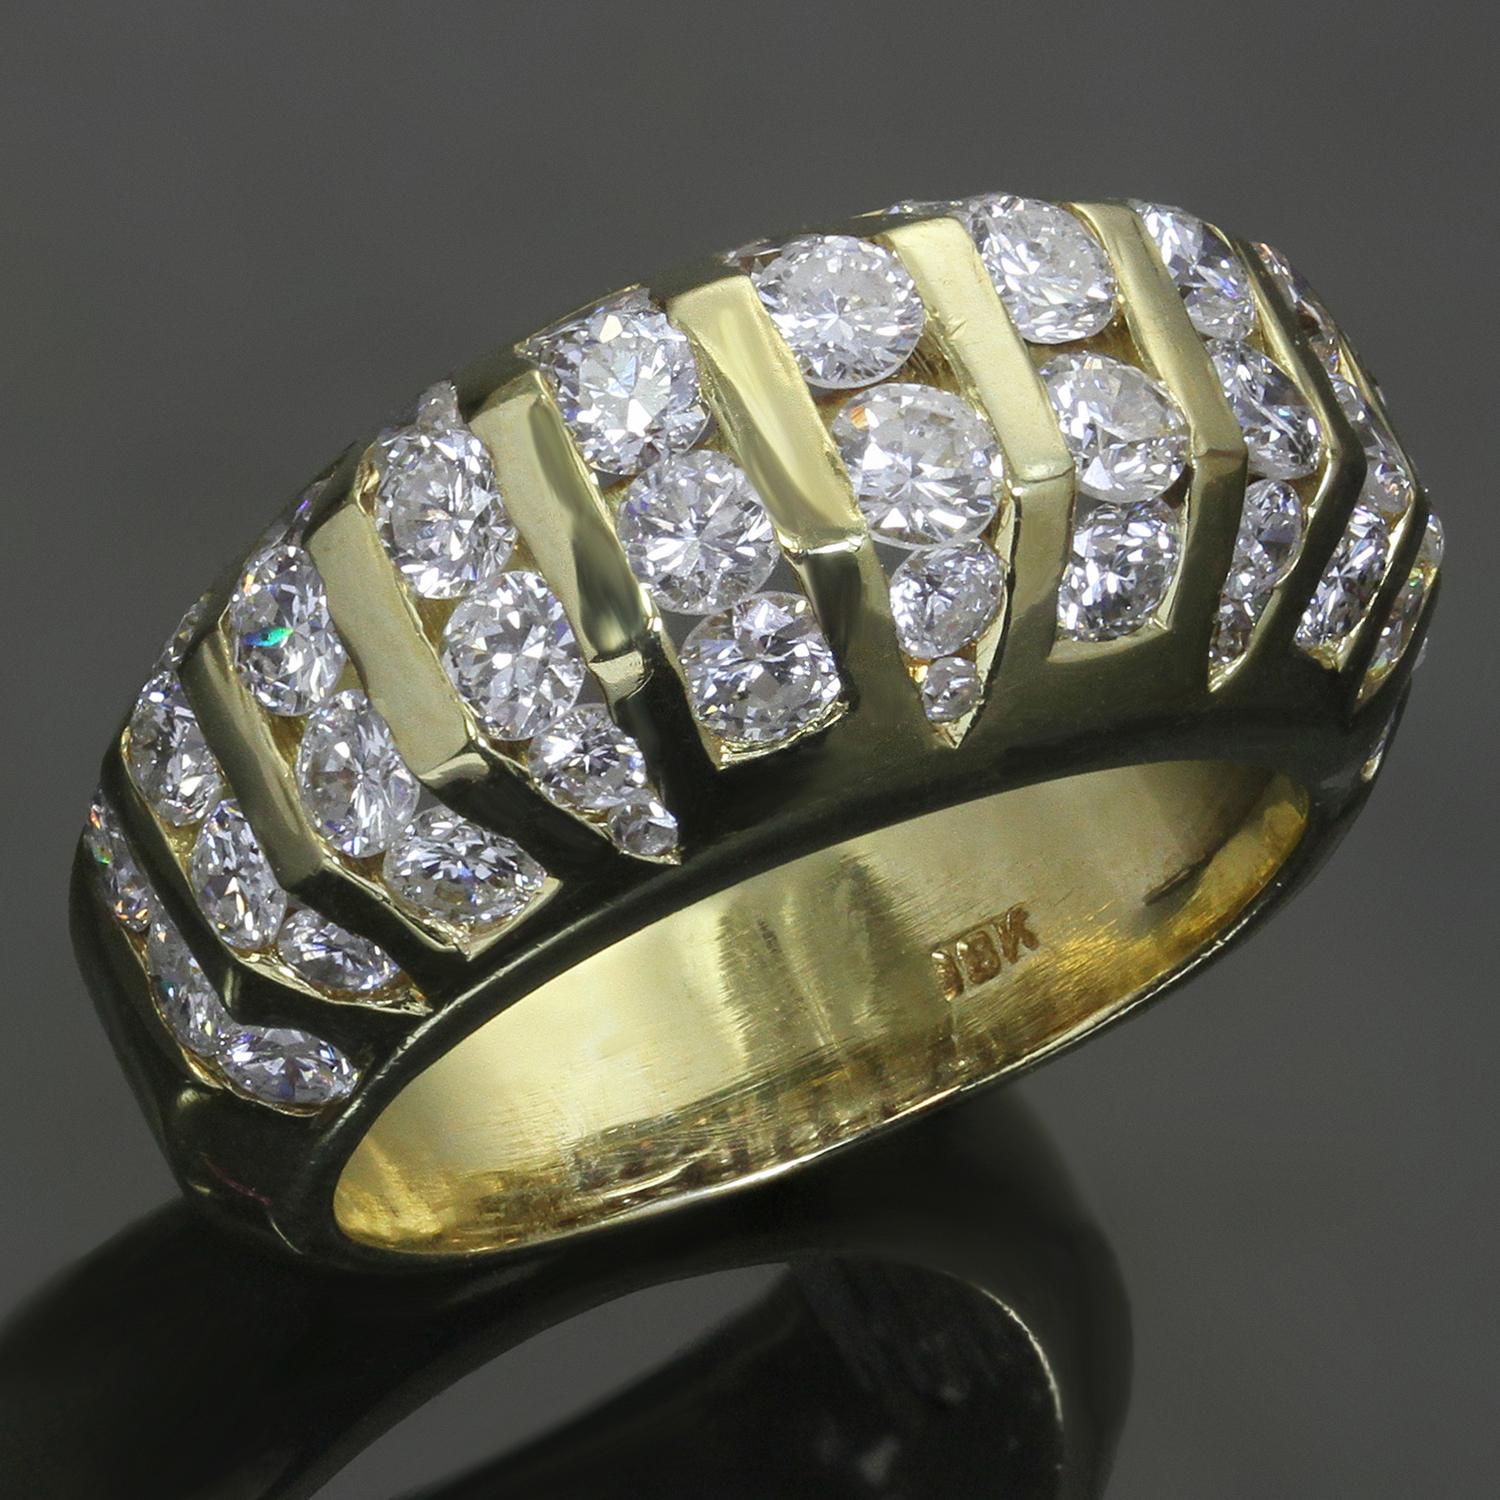 This elegant estate women's ring features a domed design crafted in 18k yellow gold and accented with 11 vertical rows channel-set with round brilliant-cut G-H VS2-SI1 diamonds weighing an estimated 3.5 carats. Made in United States circa 1980s.